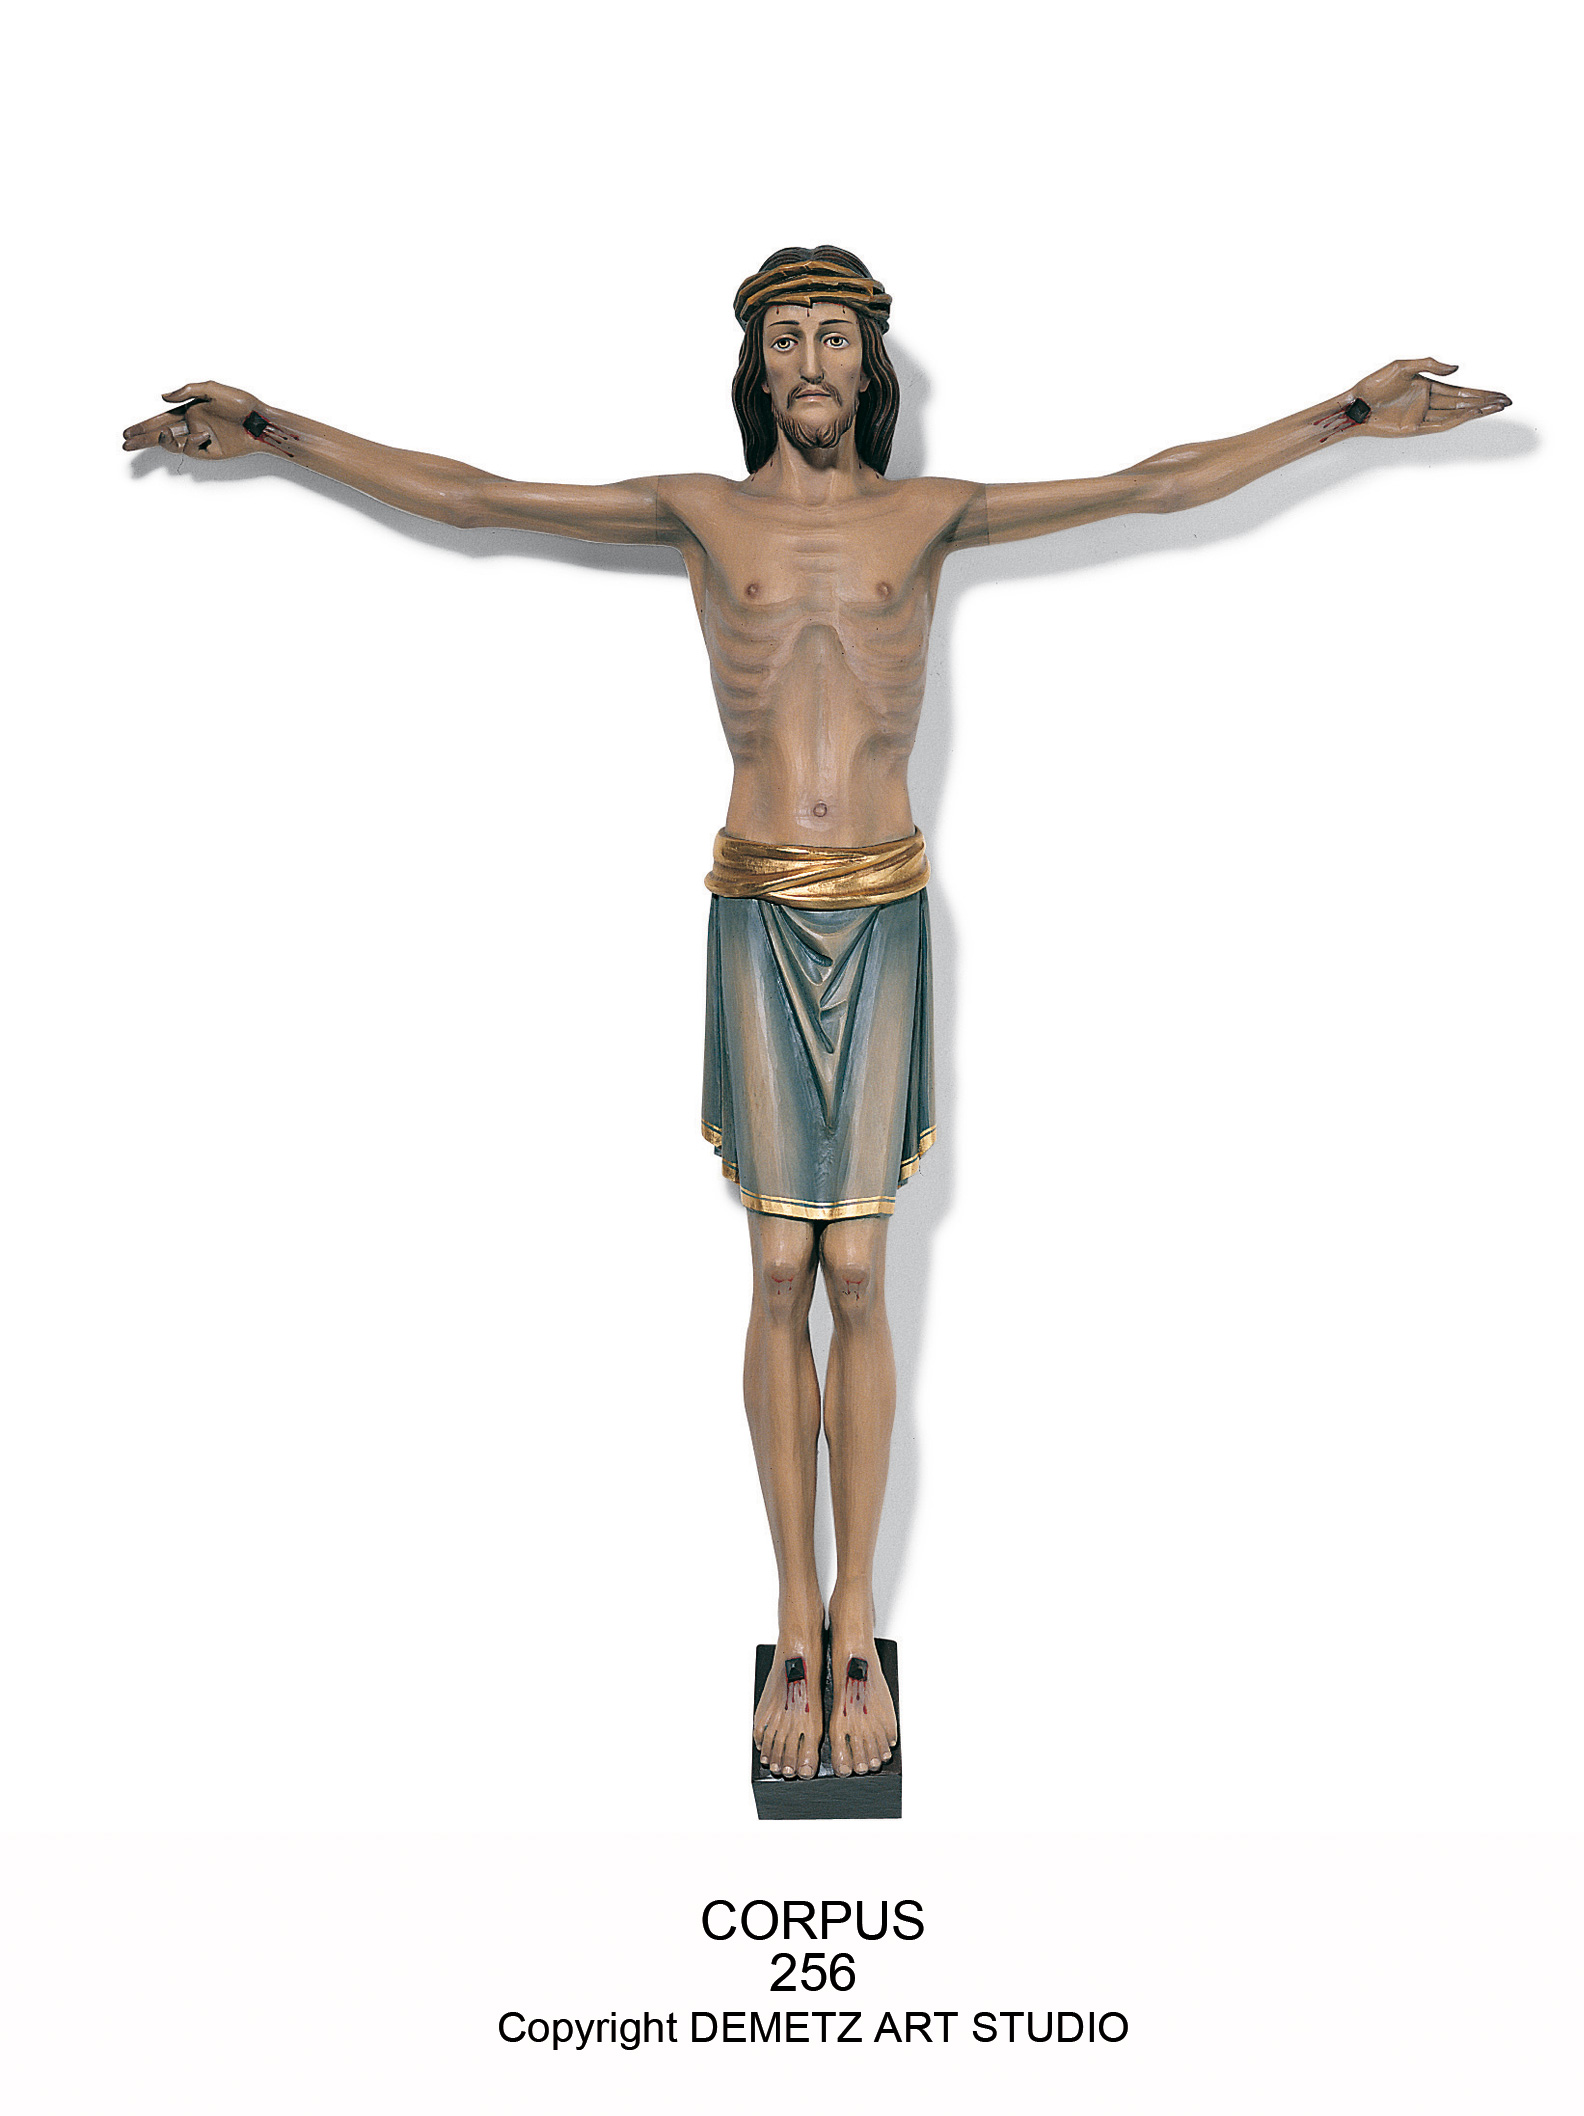 Corpus (Open Eyes) With INRI 48" Linden Wood